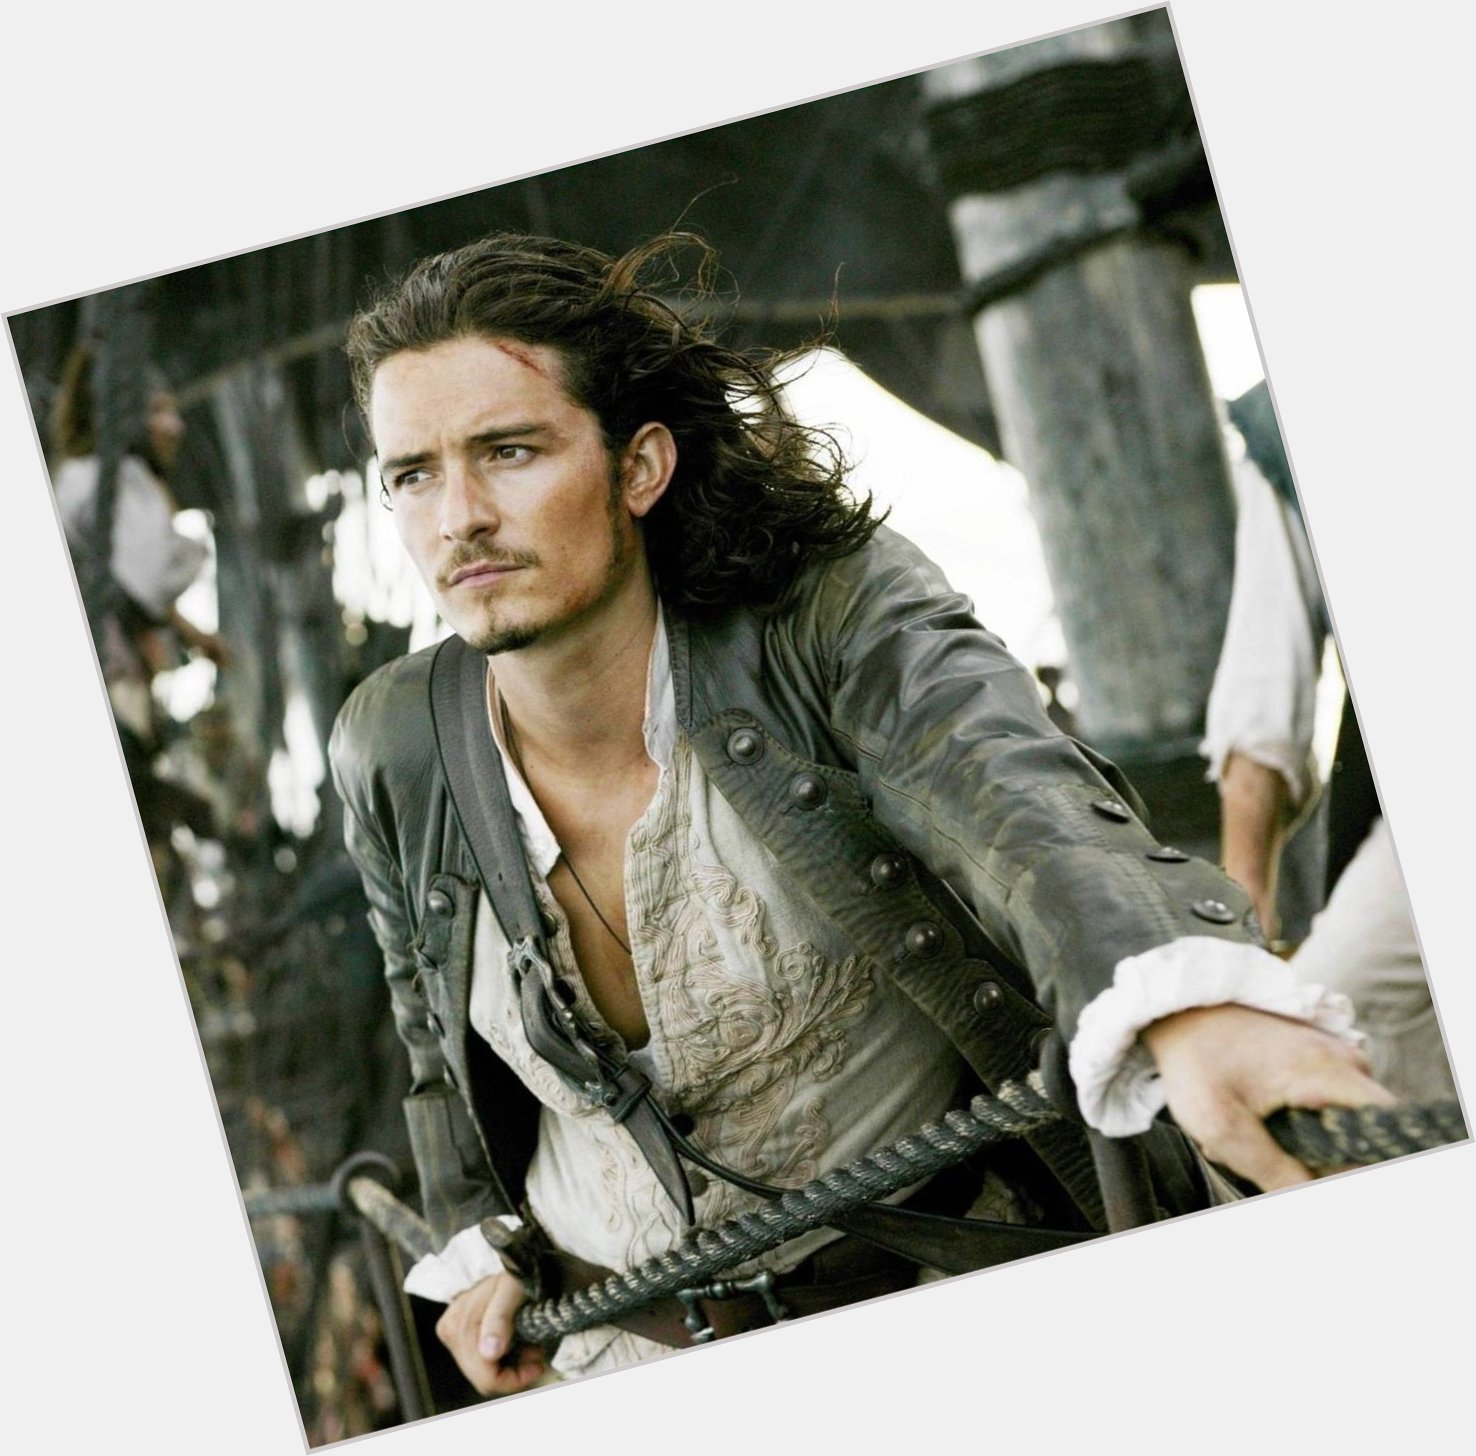 Happy Birthday to Orlando Bloom who portrayed Will Turner in the Pirates of the Caribbean series! 